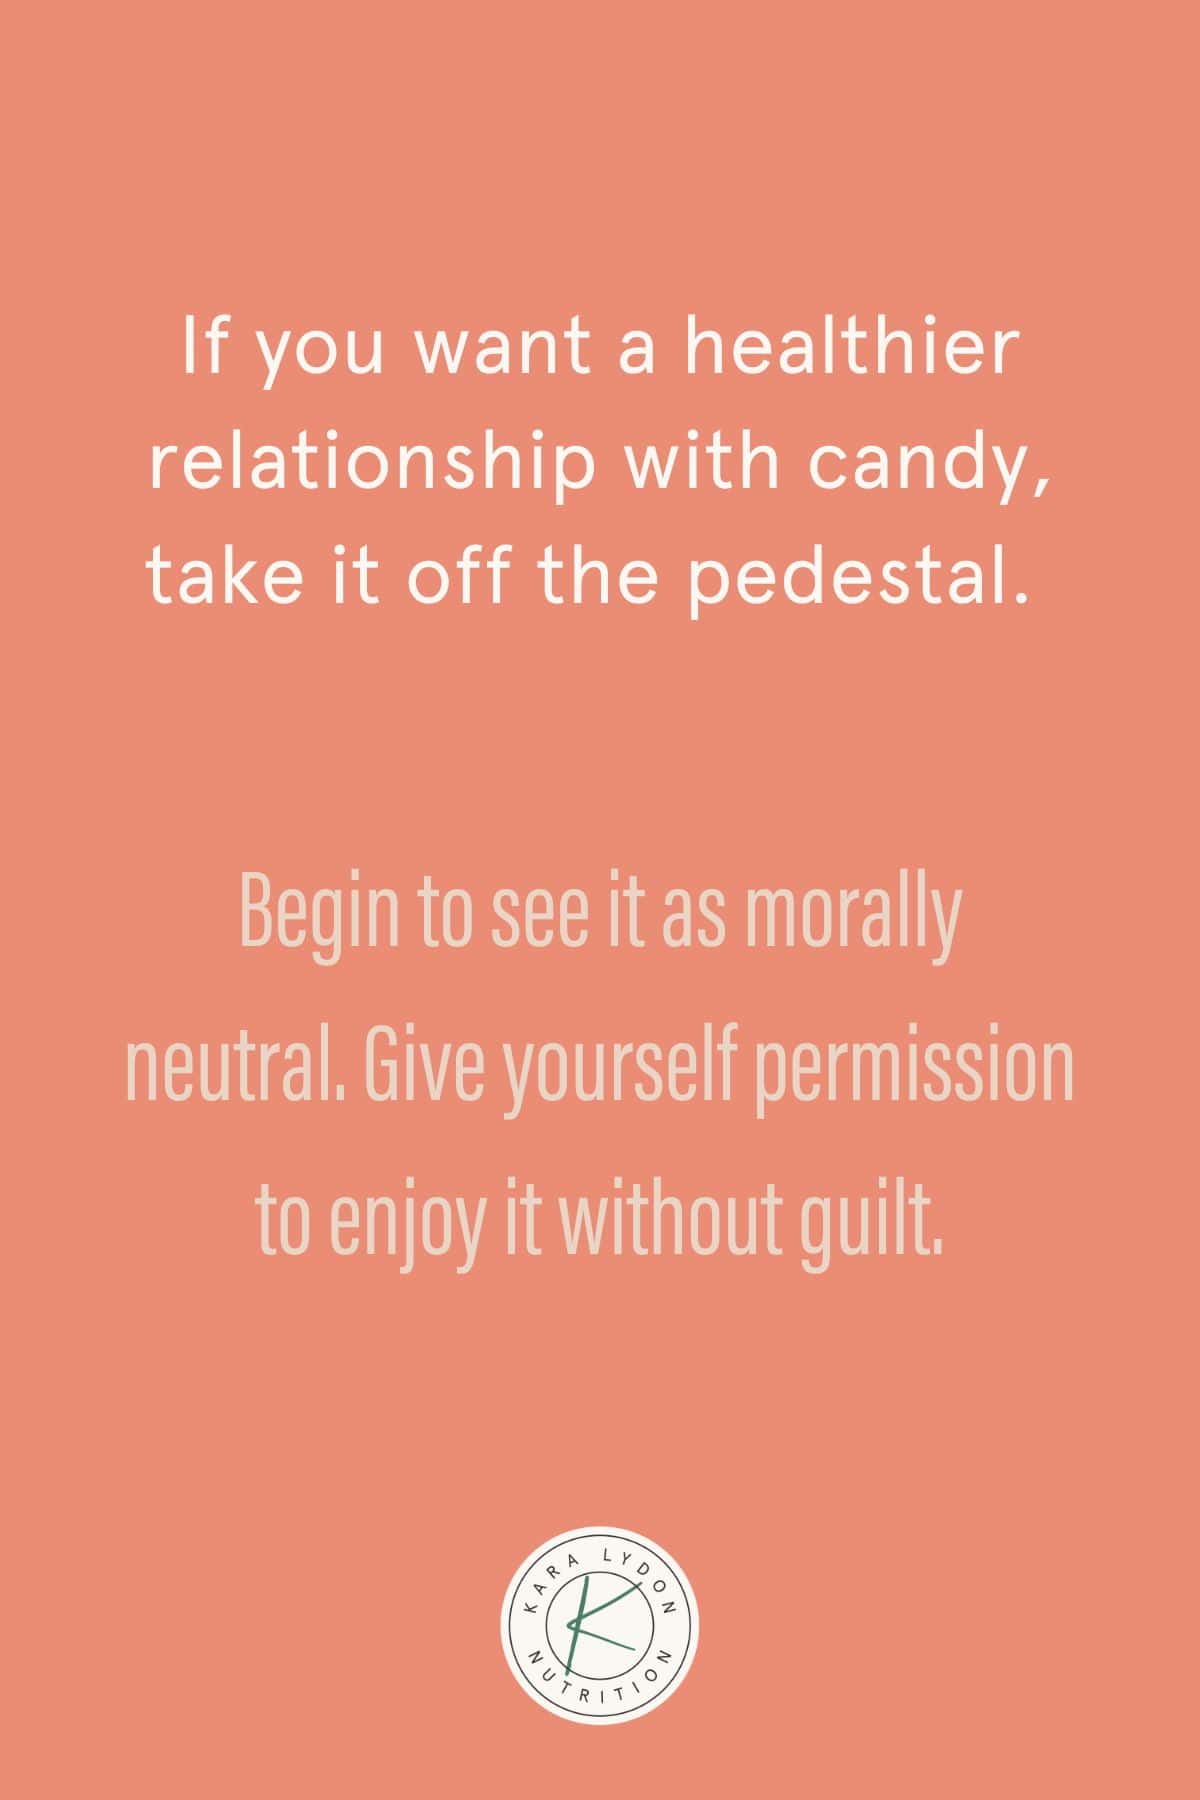 Graphic with quote: "If you want a healthier relationship with sweets, take them off the pedestal.  Start seeing it as morally neutral.  Give yourself permission to enjoy it without guilt."